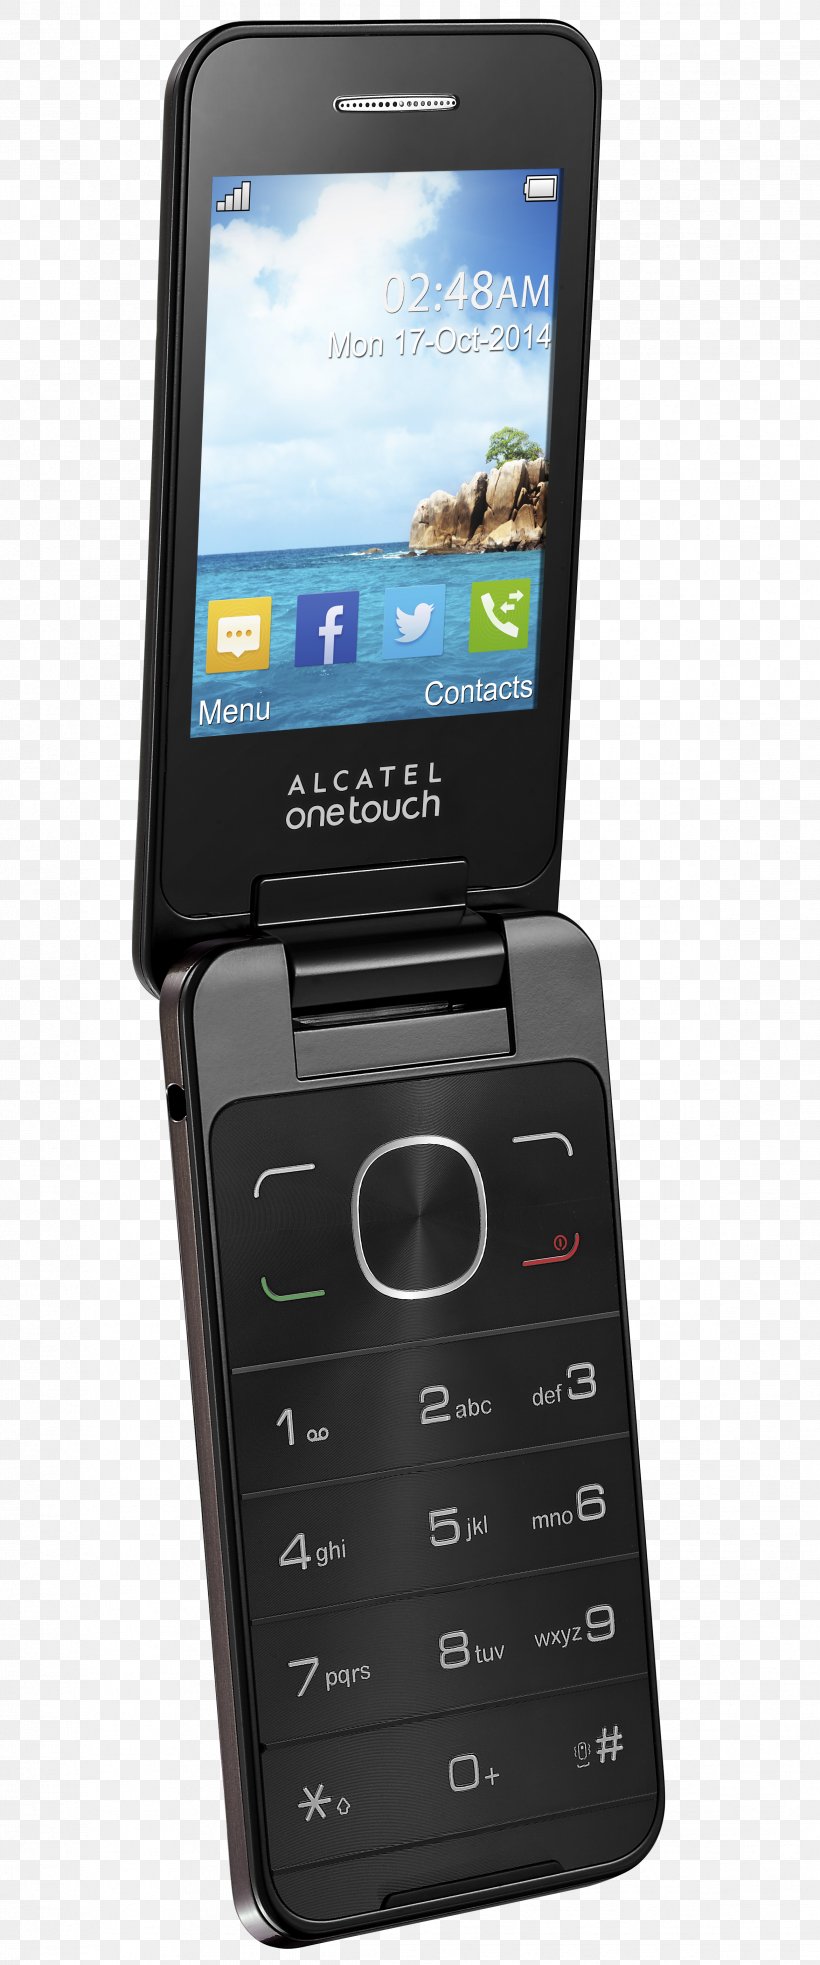 Alcatel One Touch Alcatel Mobile Clamshell Design Telephone Smartphone, PNG, 2342x5615px, Alcatel One Touch, Alcatel Mobile, Alcatel Onetouch 2012, Cellular Network, Clamshell Design Download Free